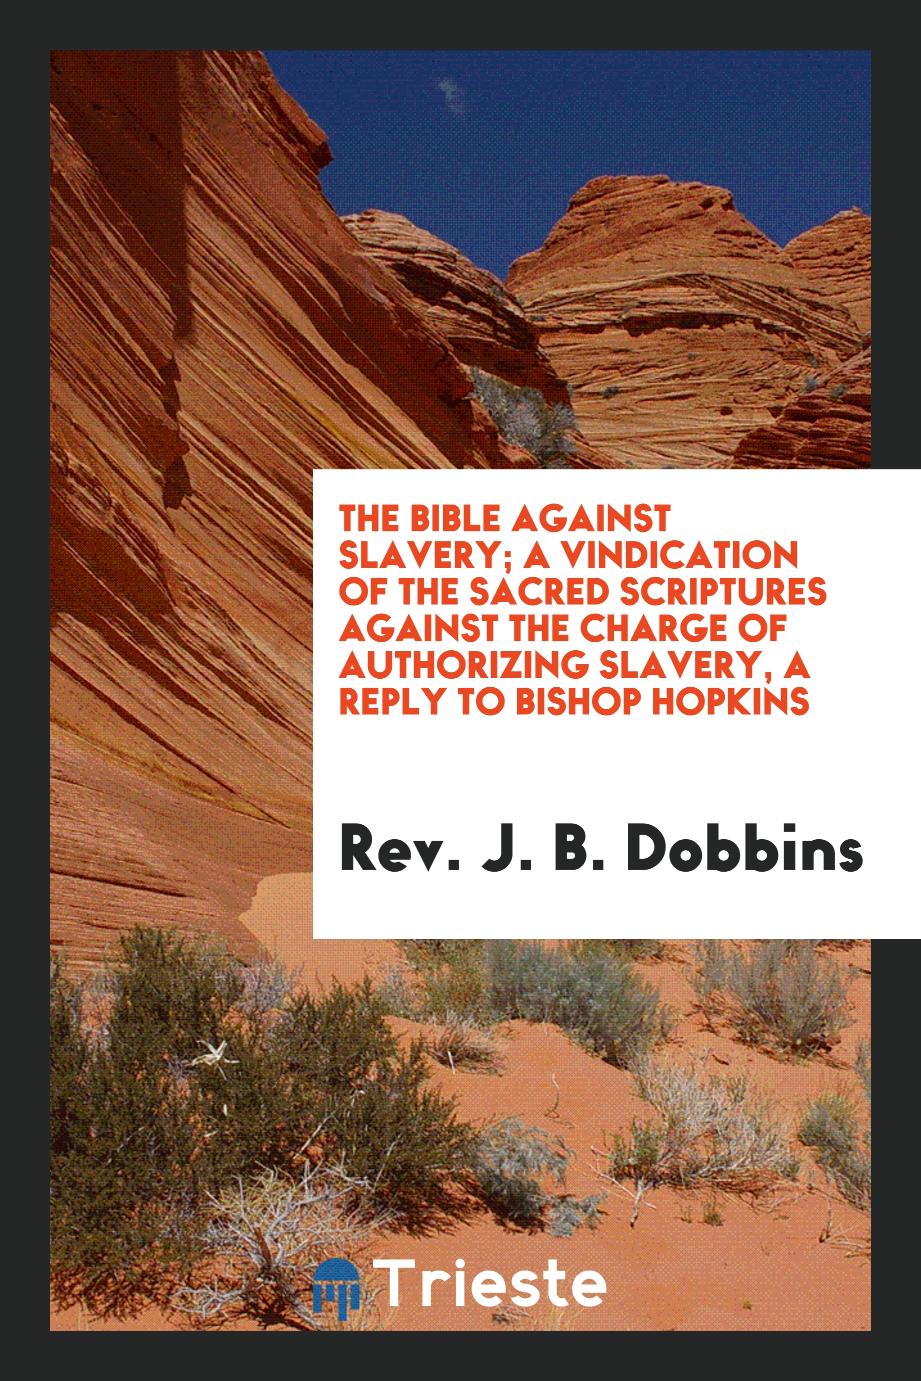 The Bible Against Slavery; A Vindication of the Sacred Scriptures Against the Charge of Authorizing Slavery, a Reply to Bishop Hopkins